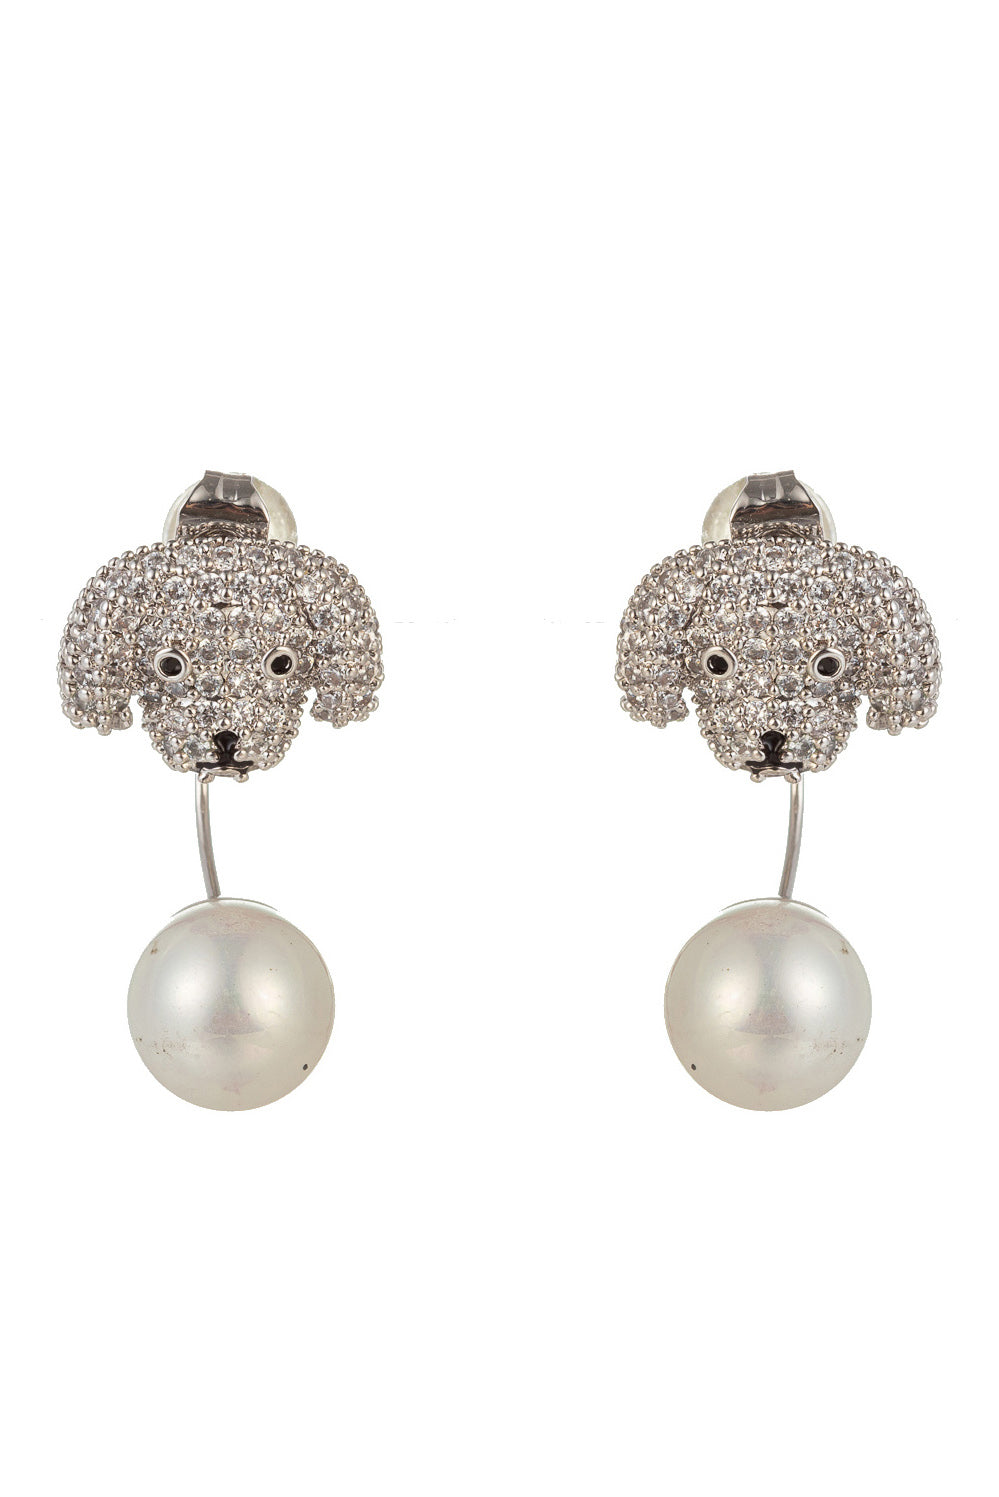 Silver poodle earrings studded with CZ crystals.